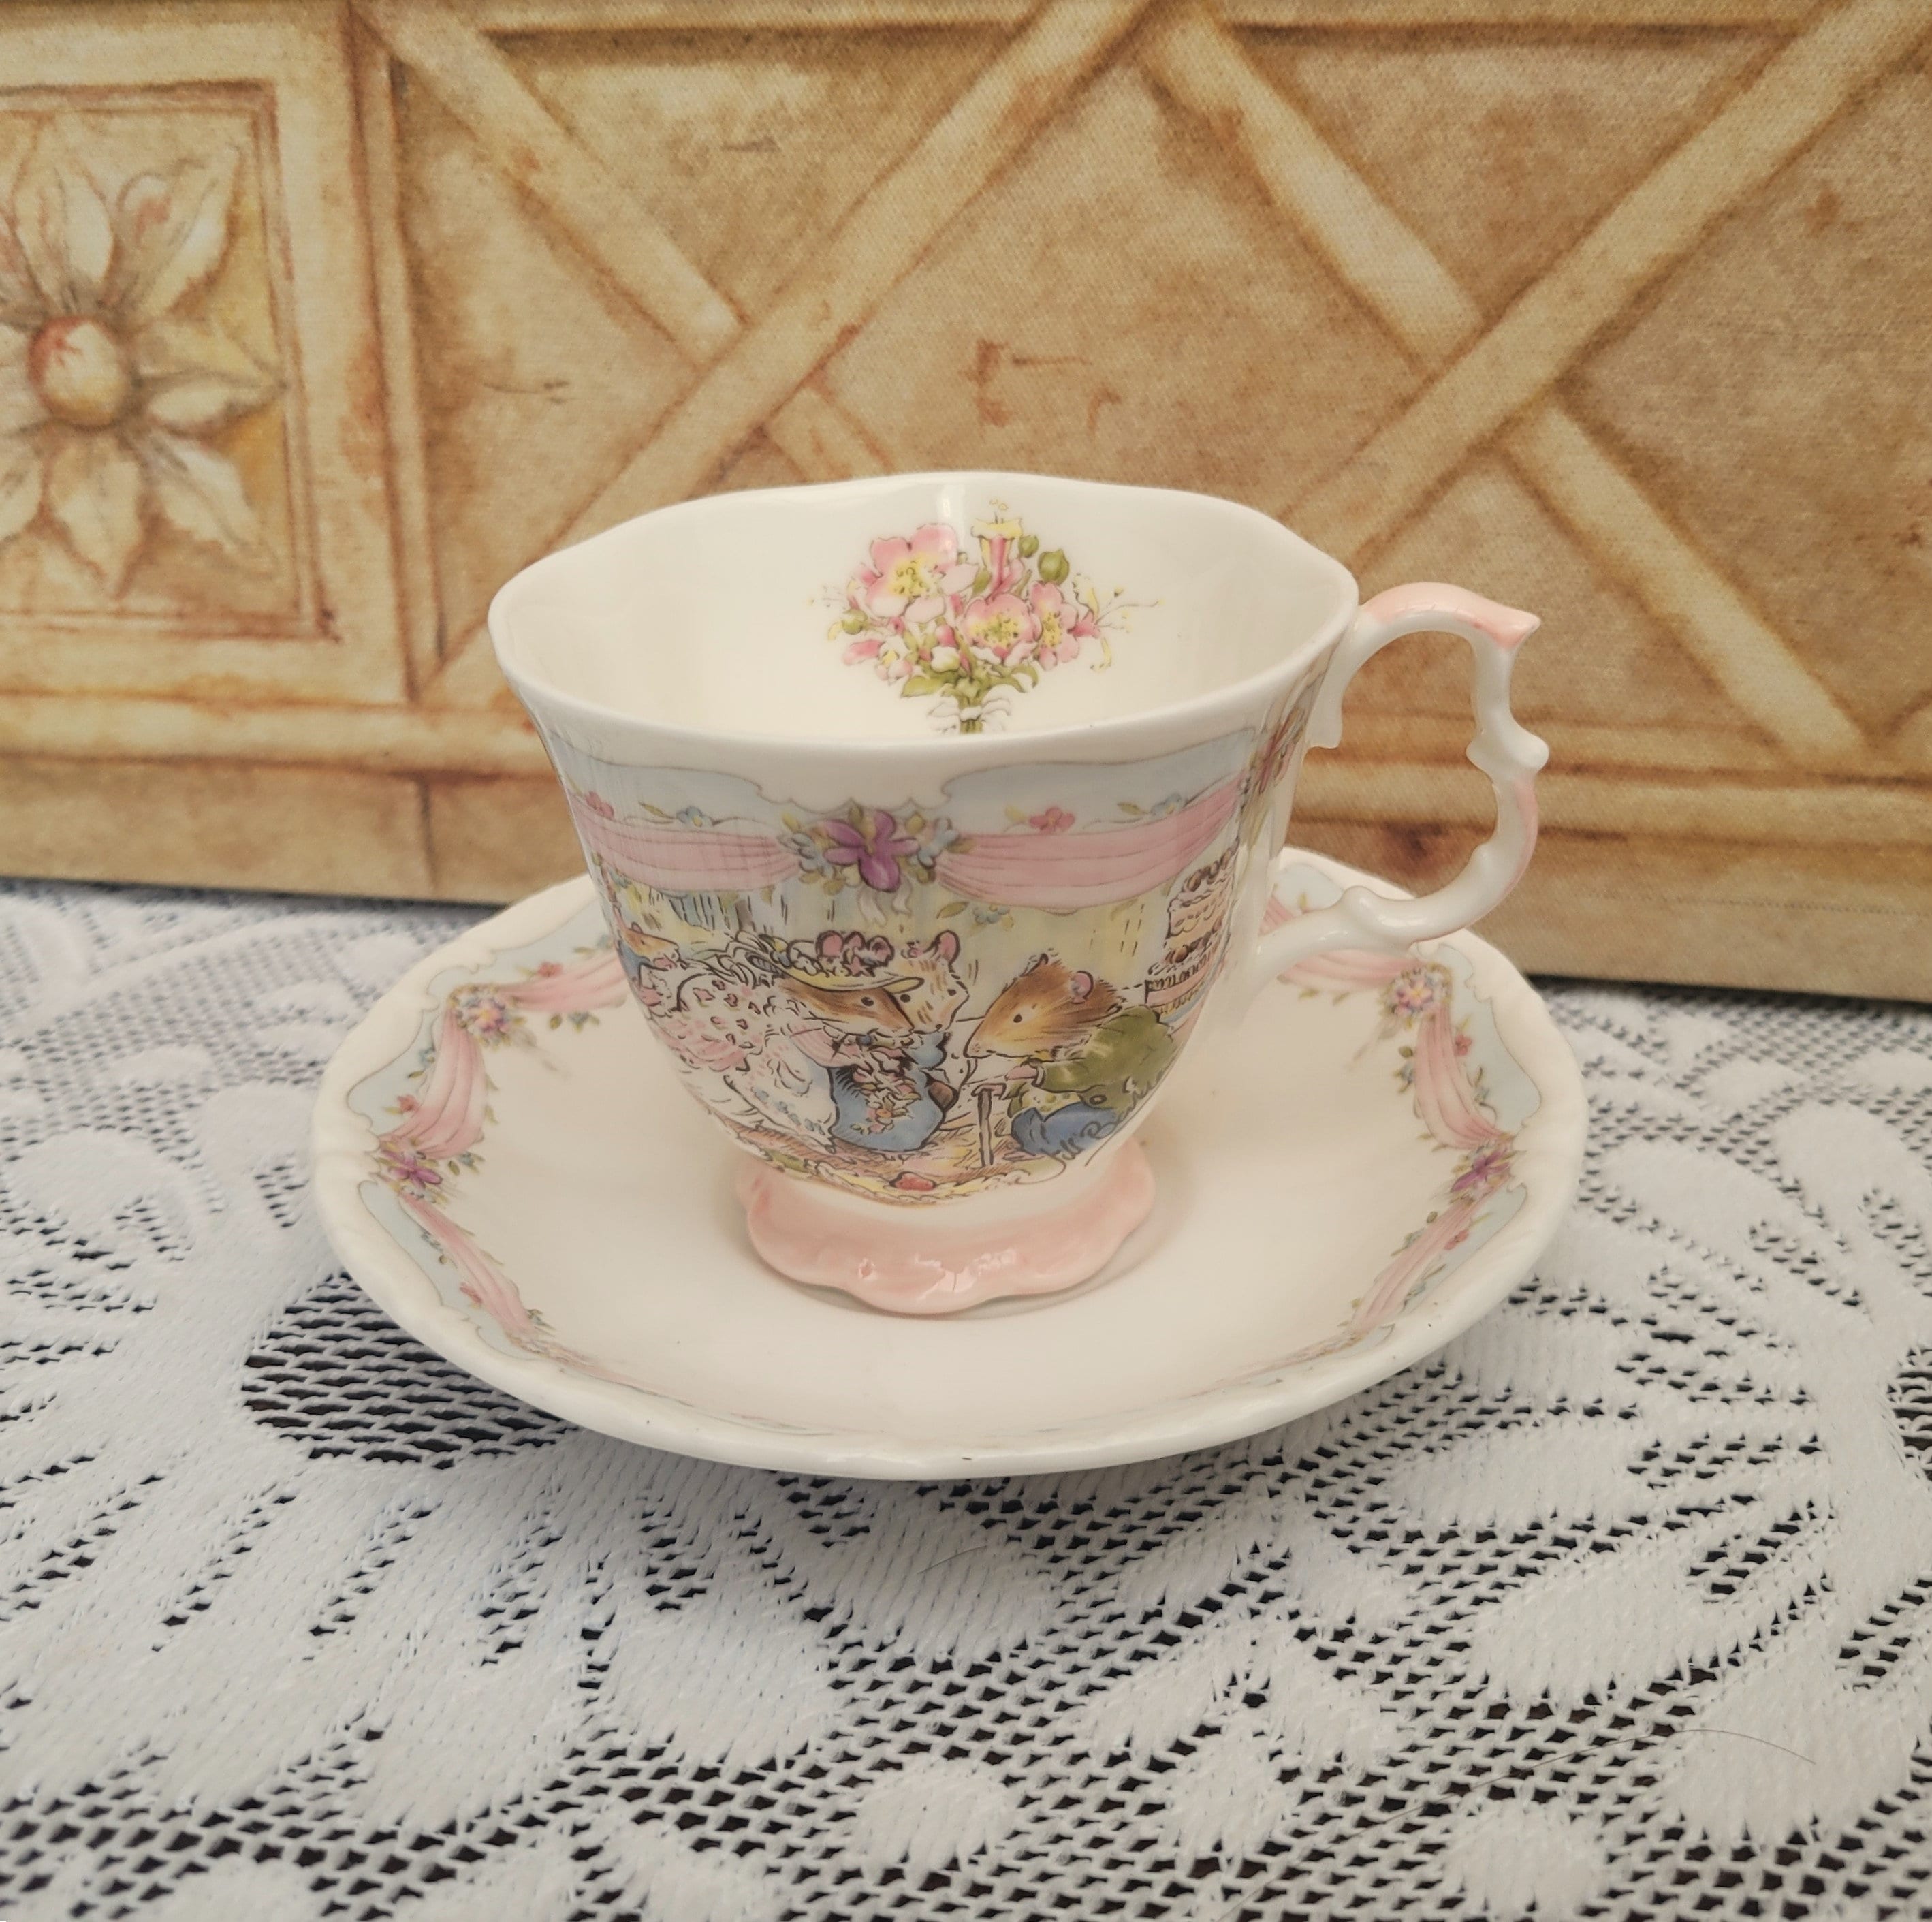 Brambly Hedge Tea Cup and Saucer, The Wedding, Royal Doulton, Full Sized